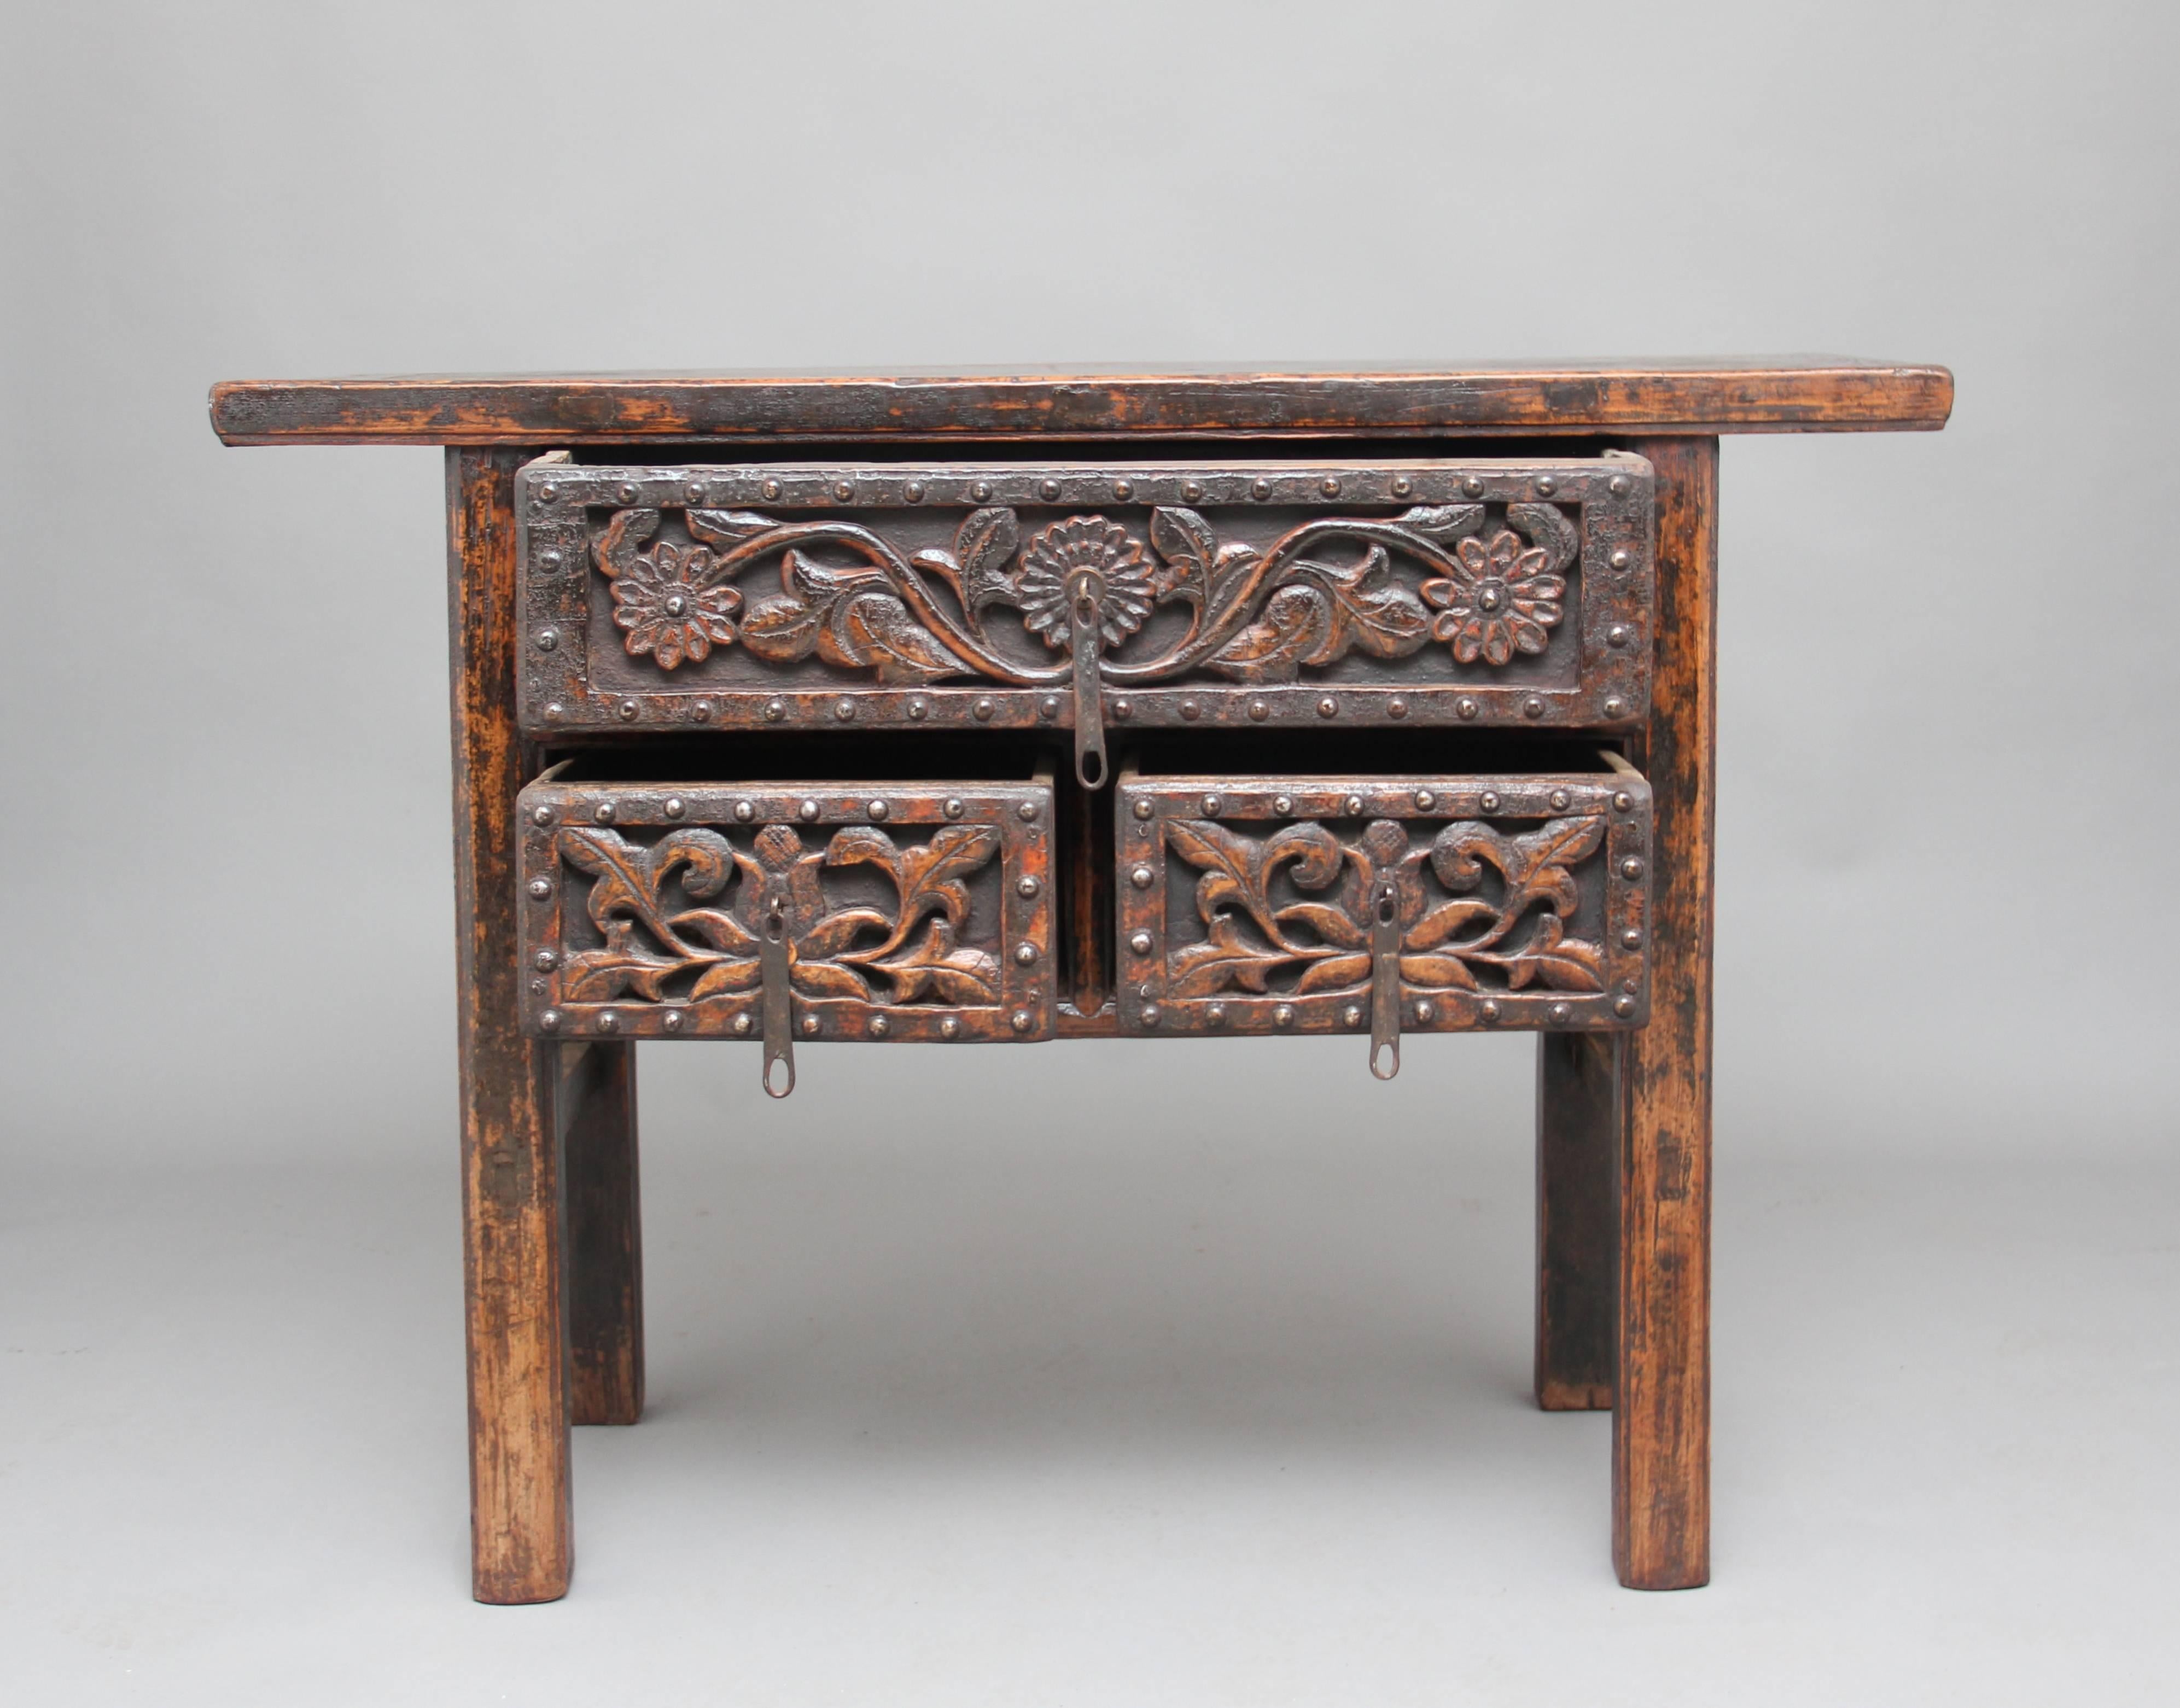 19th century Chinese rustic elm dresser with one long over two short drawers, with the drawer fronts having a carved floral design and original brass hardware, standing on square legs supported with side stretchers, circa 1880.
   